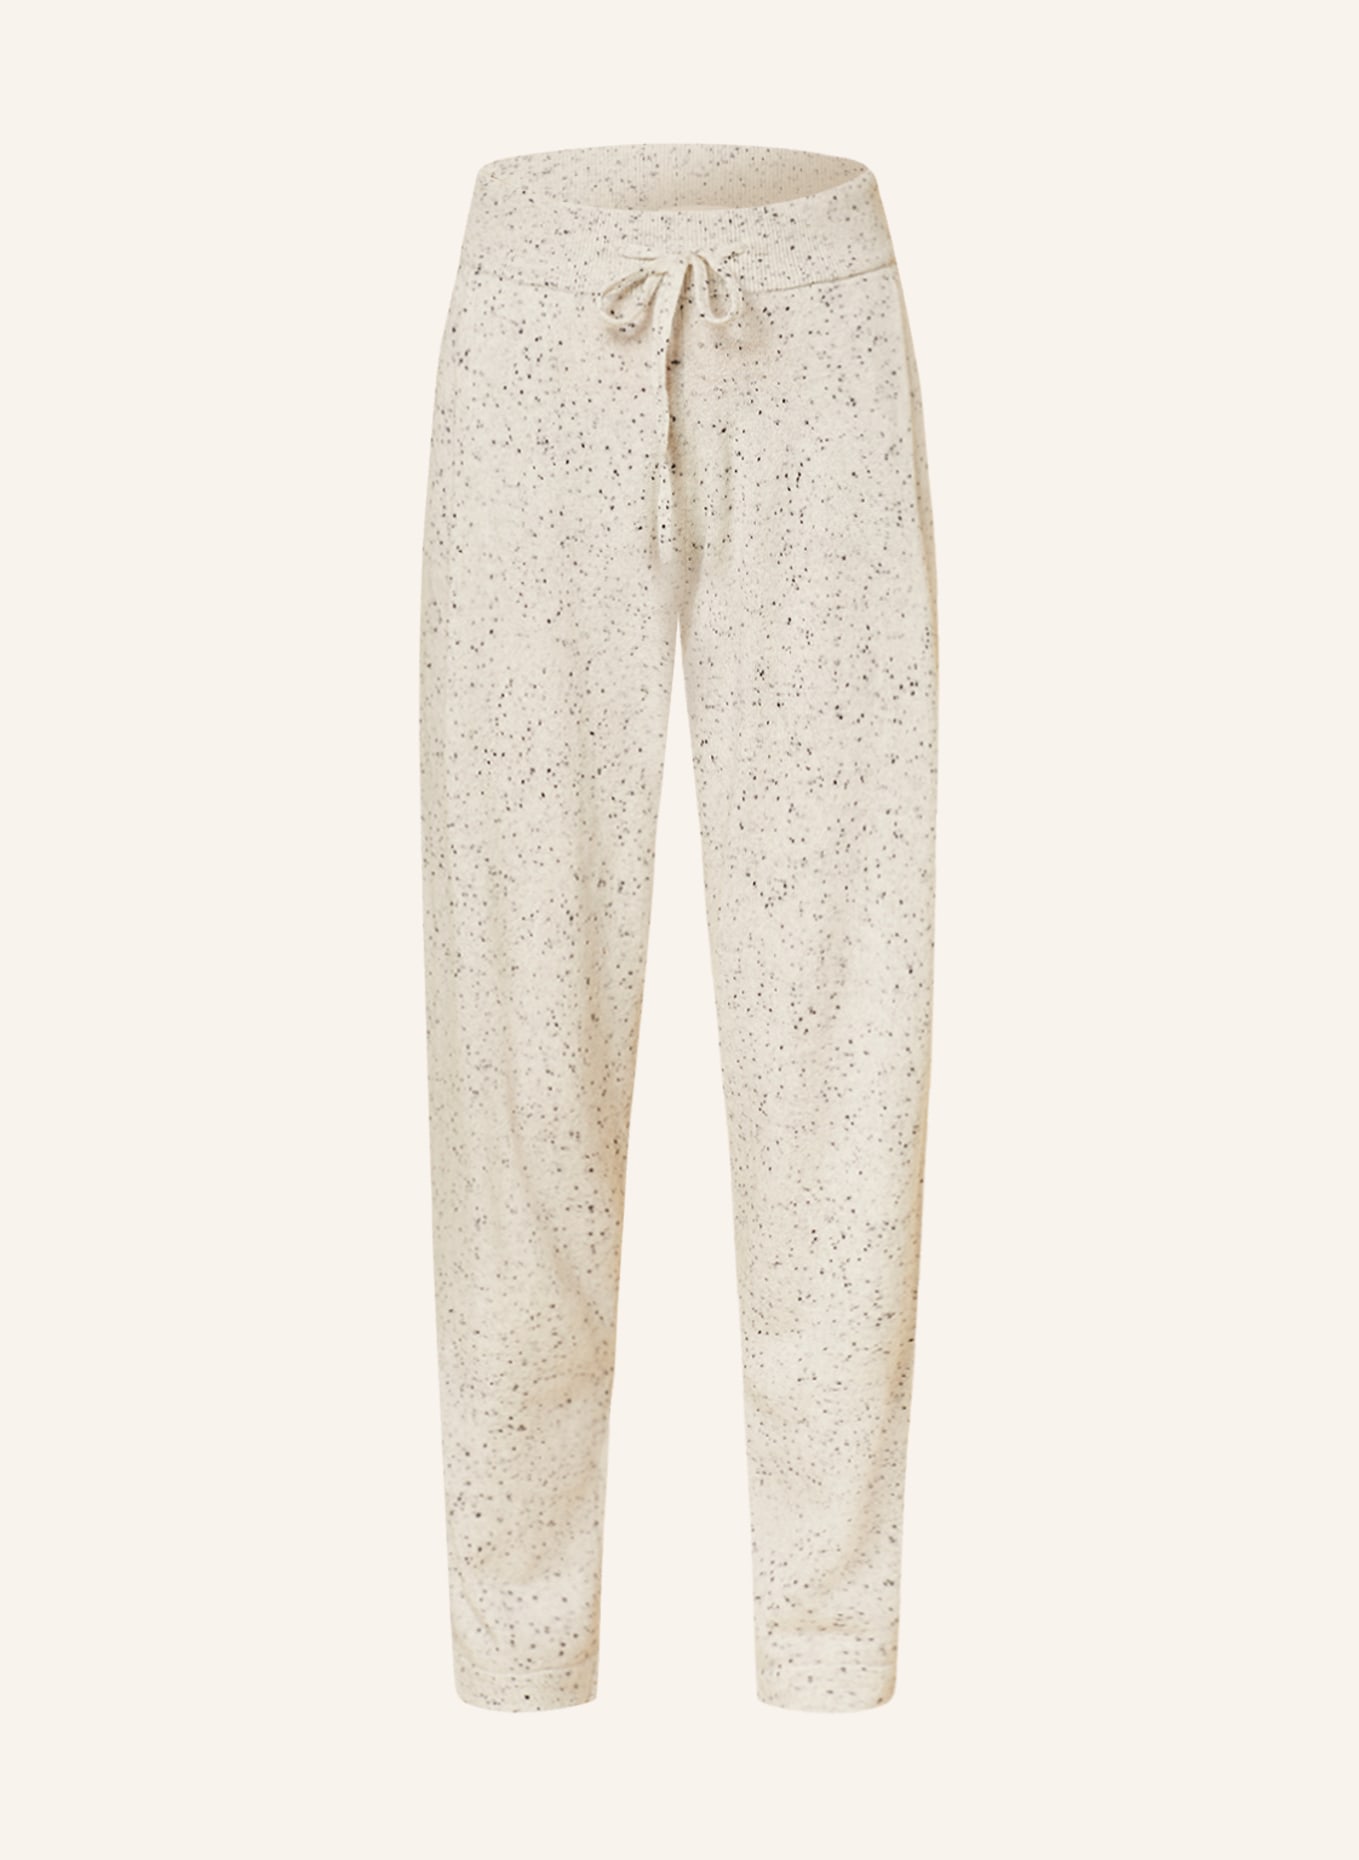 LISA YANG Knit trousers JO made of cashmere in jogger style, Color: LIGHT GRAY/ DARK GRAY (Image 1)